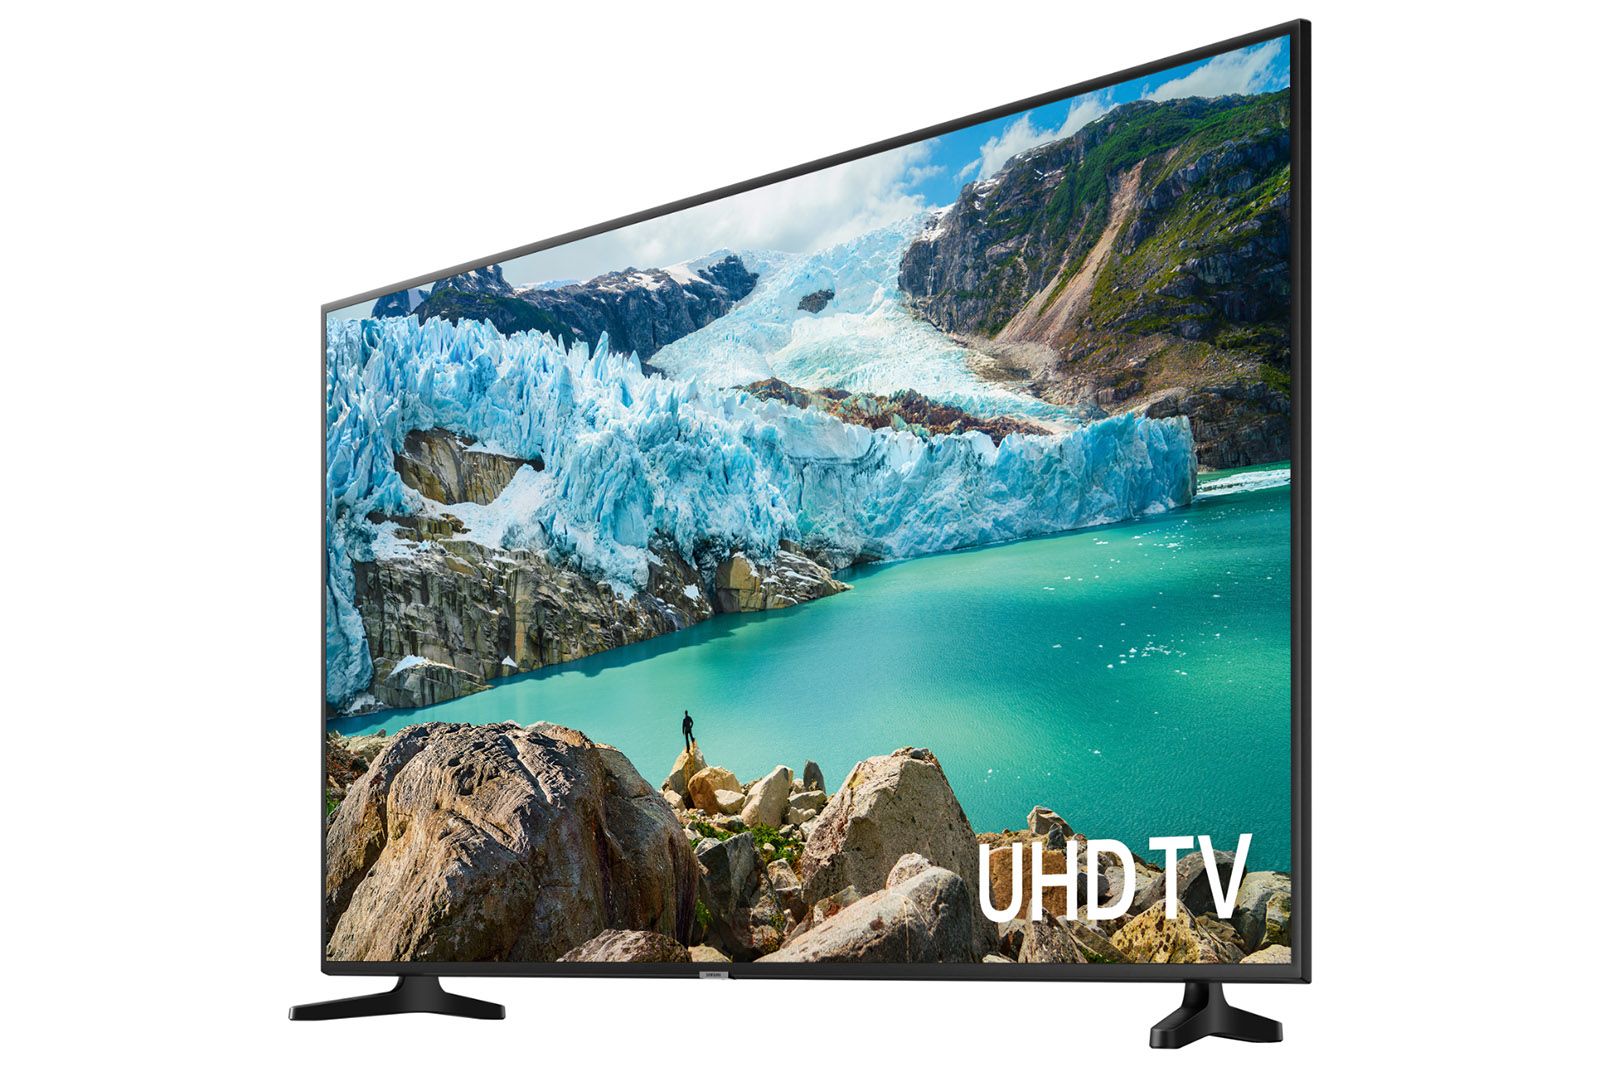 Samsung RU7020 LED TV review official image 1